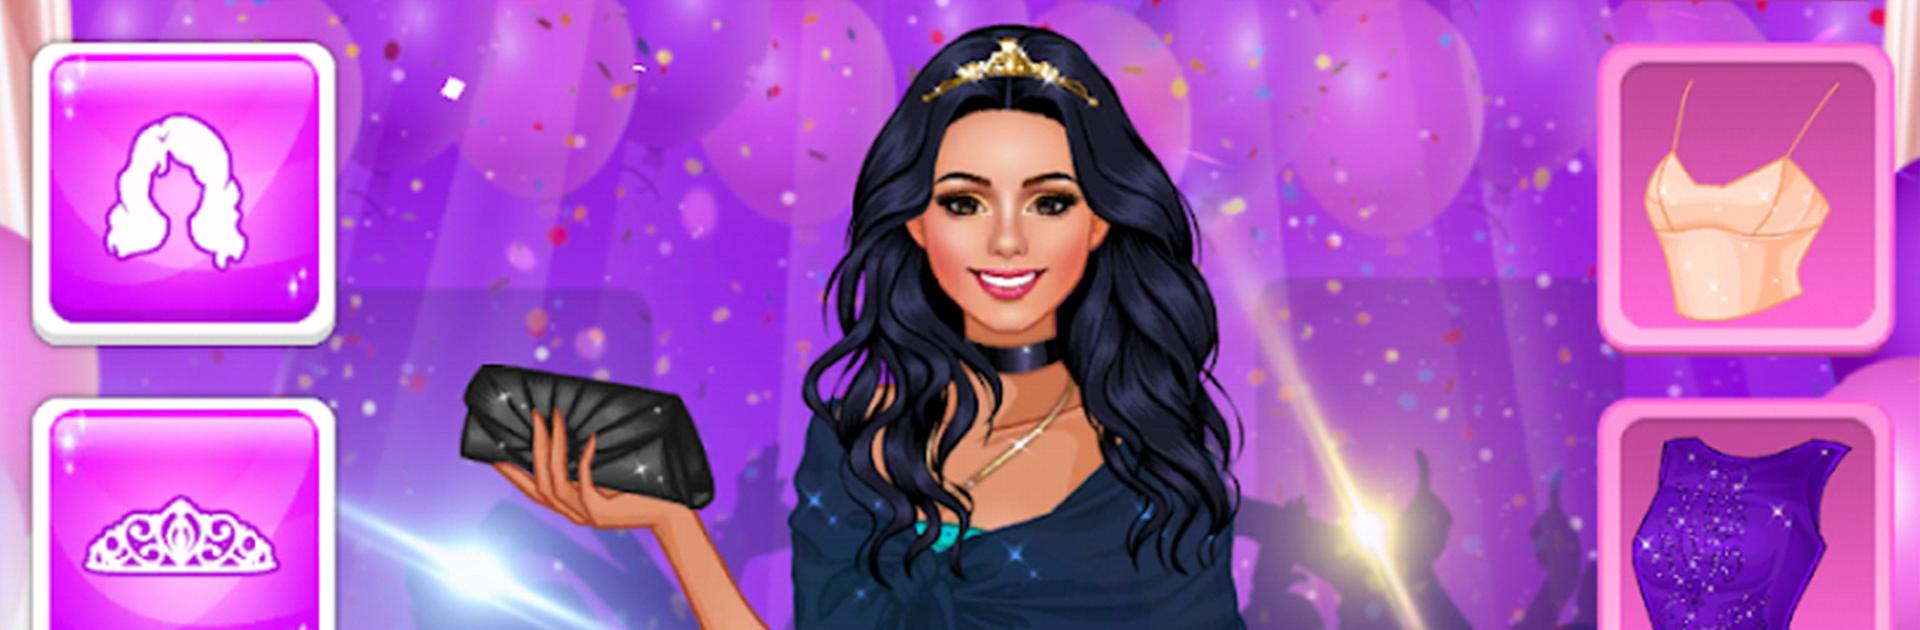 Dress Up - Games For Girls PC - Free Desktop Download & Play